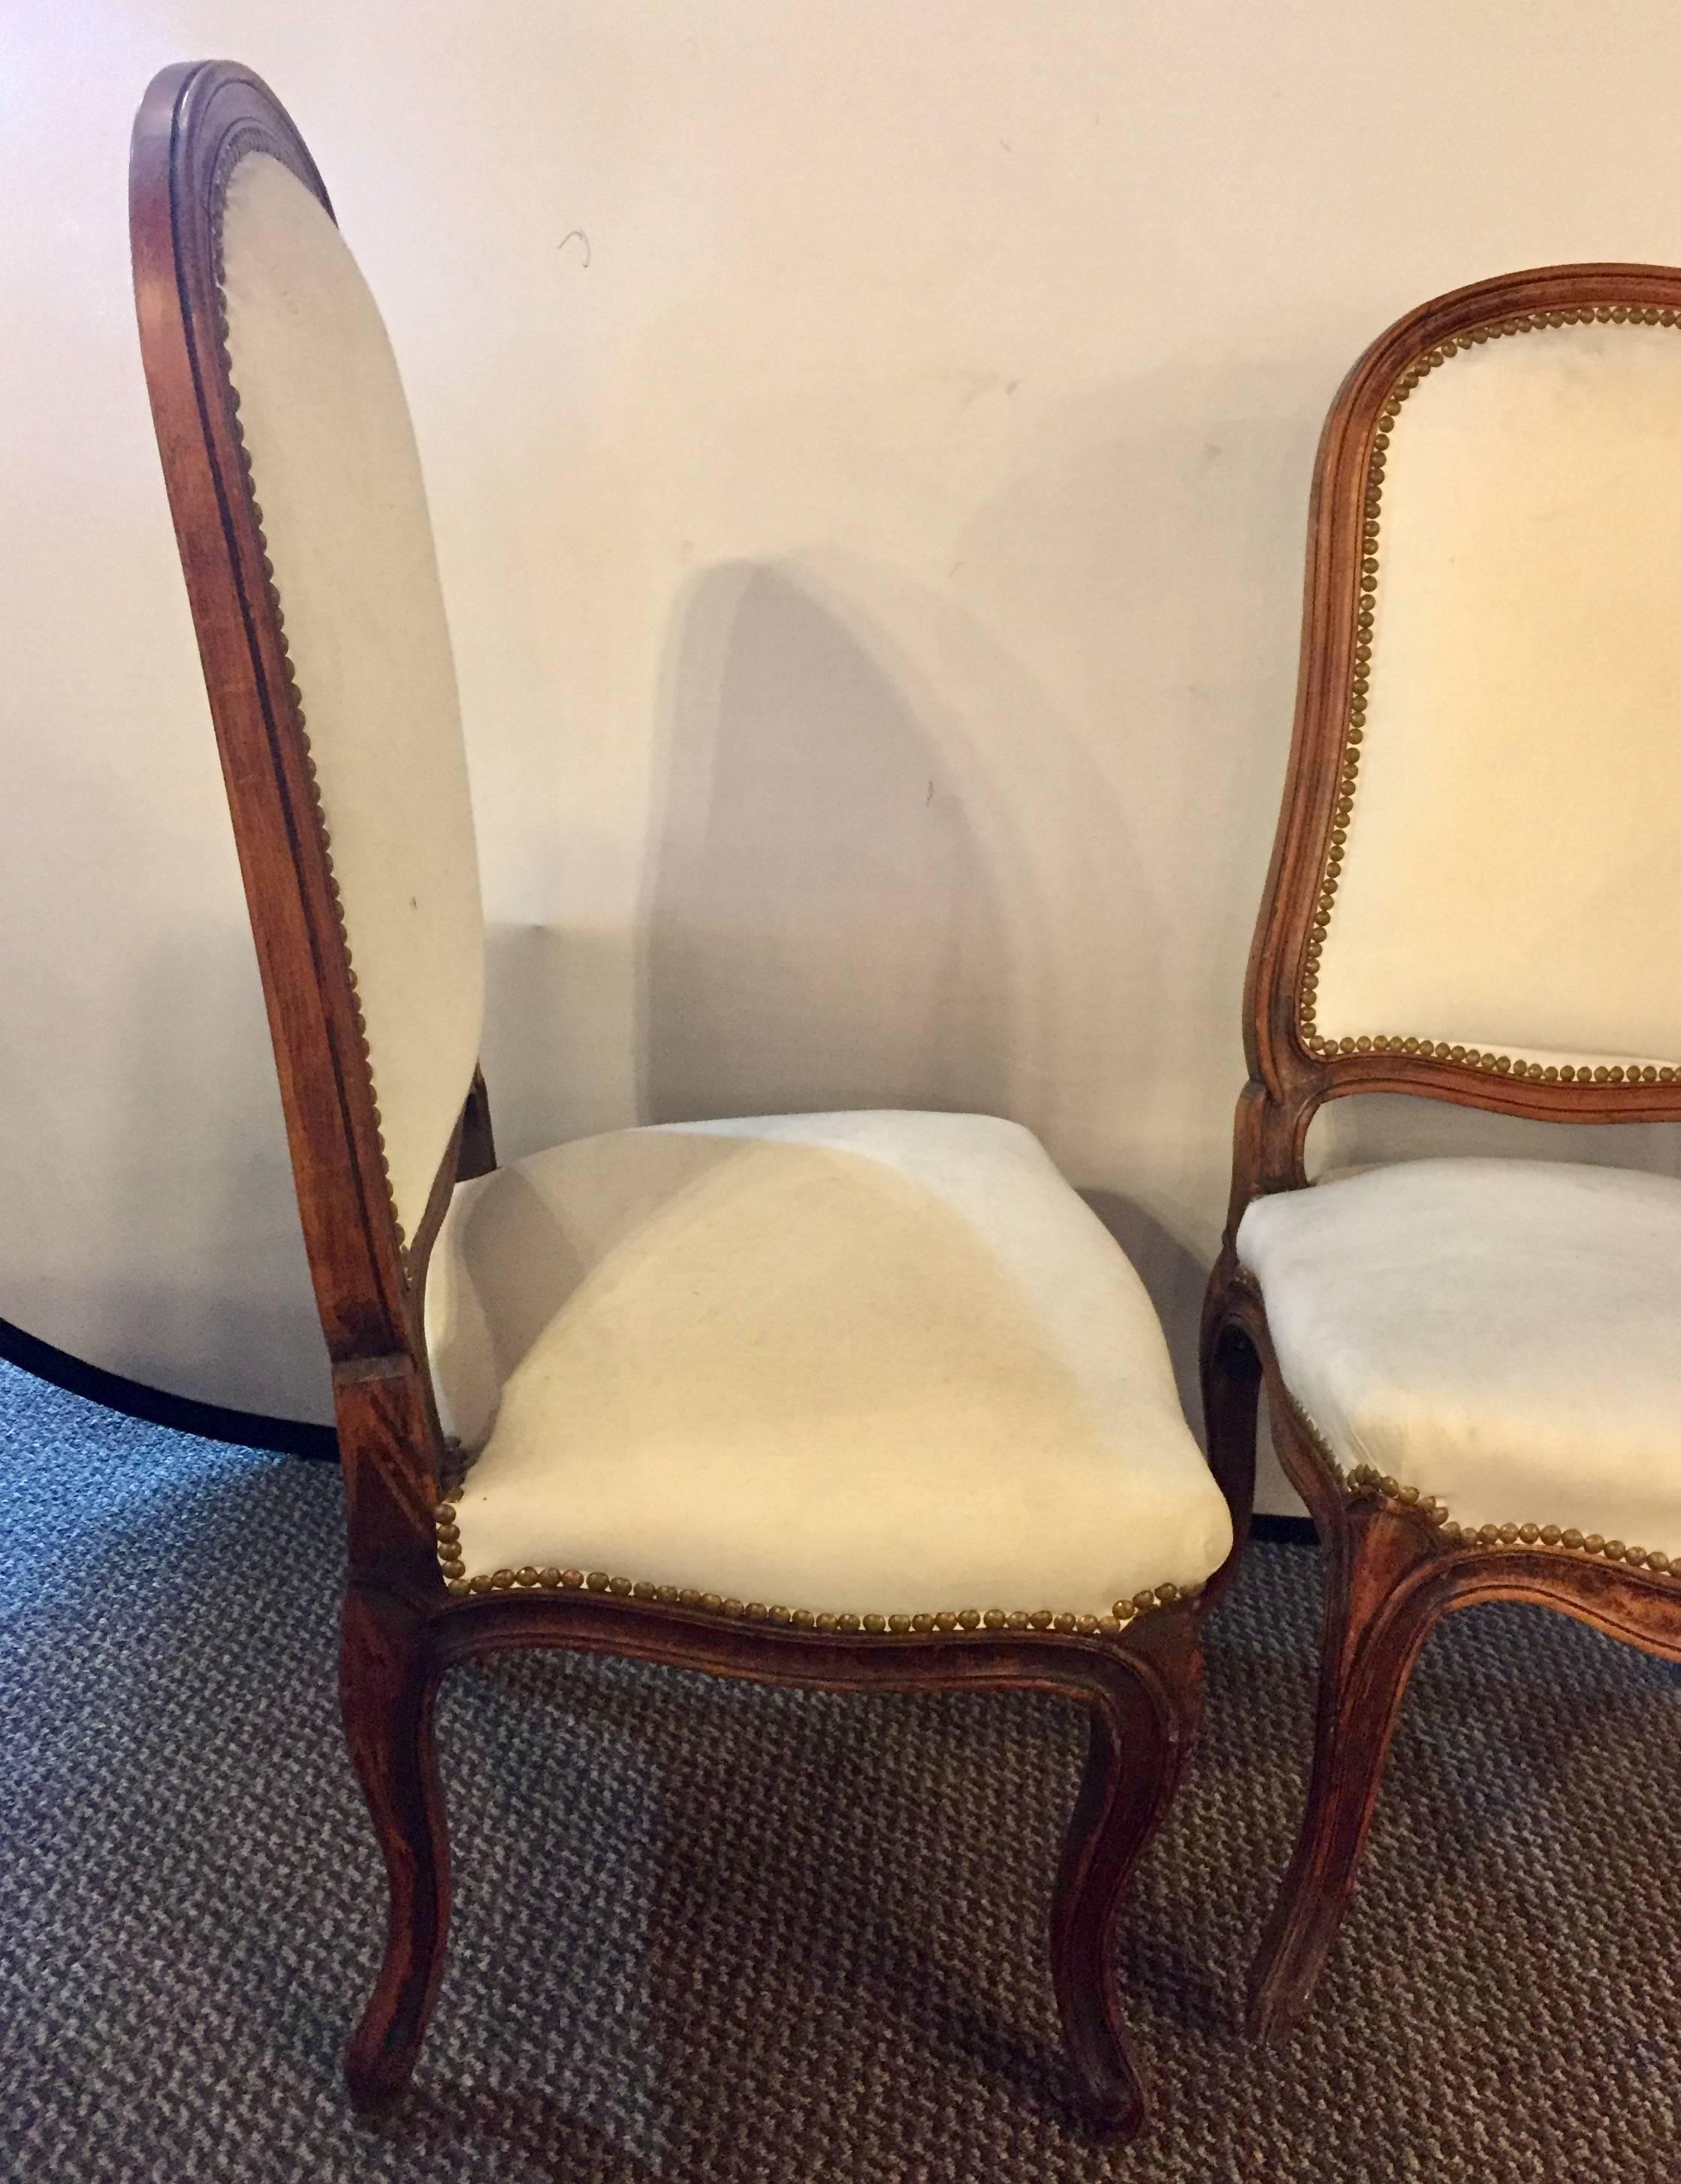 Pair of Louis XV style Maison Jansen boudoir side chairs. Pair of diminutive ladies chairs each having a mahogany frame with a Muslim fabric supported by brass tacks.